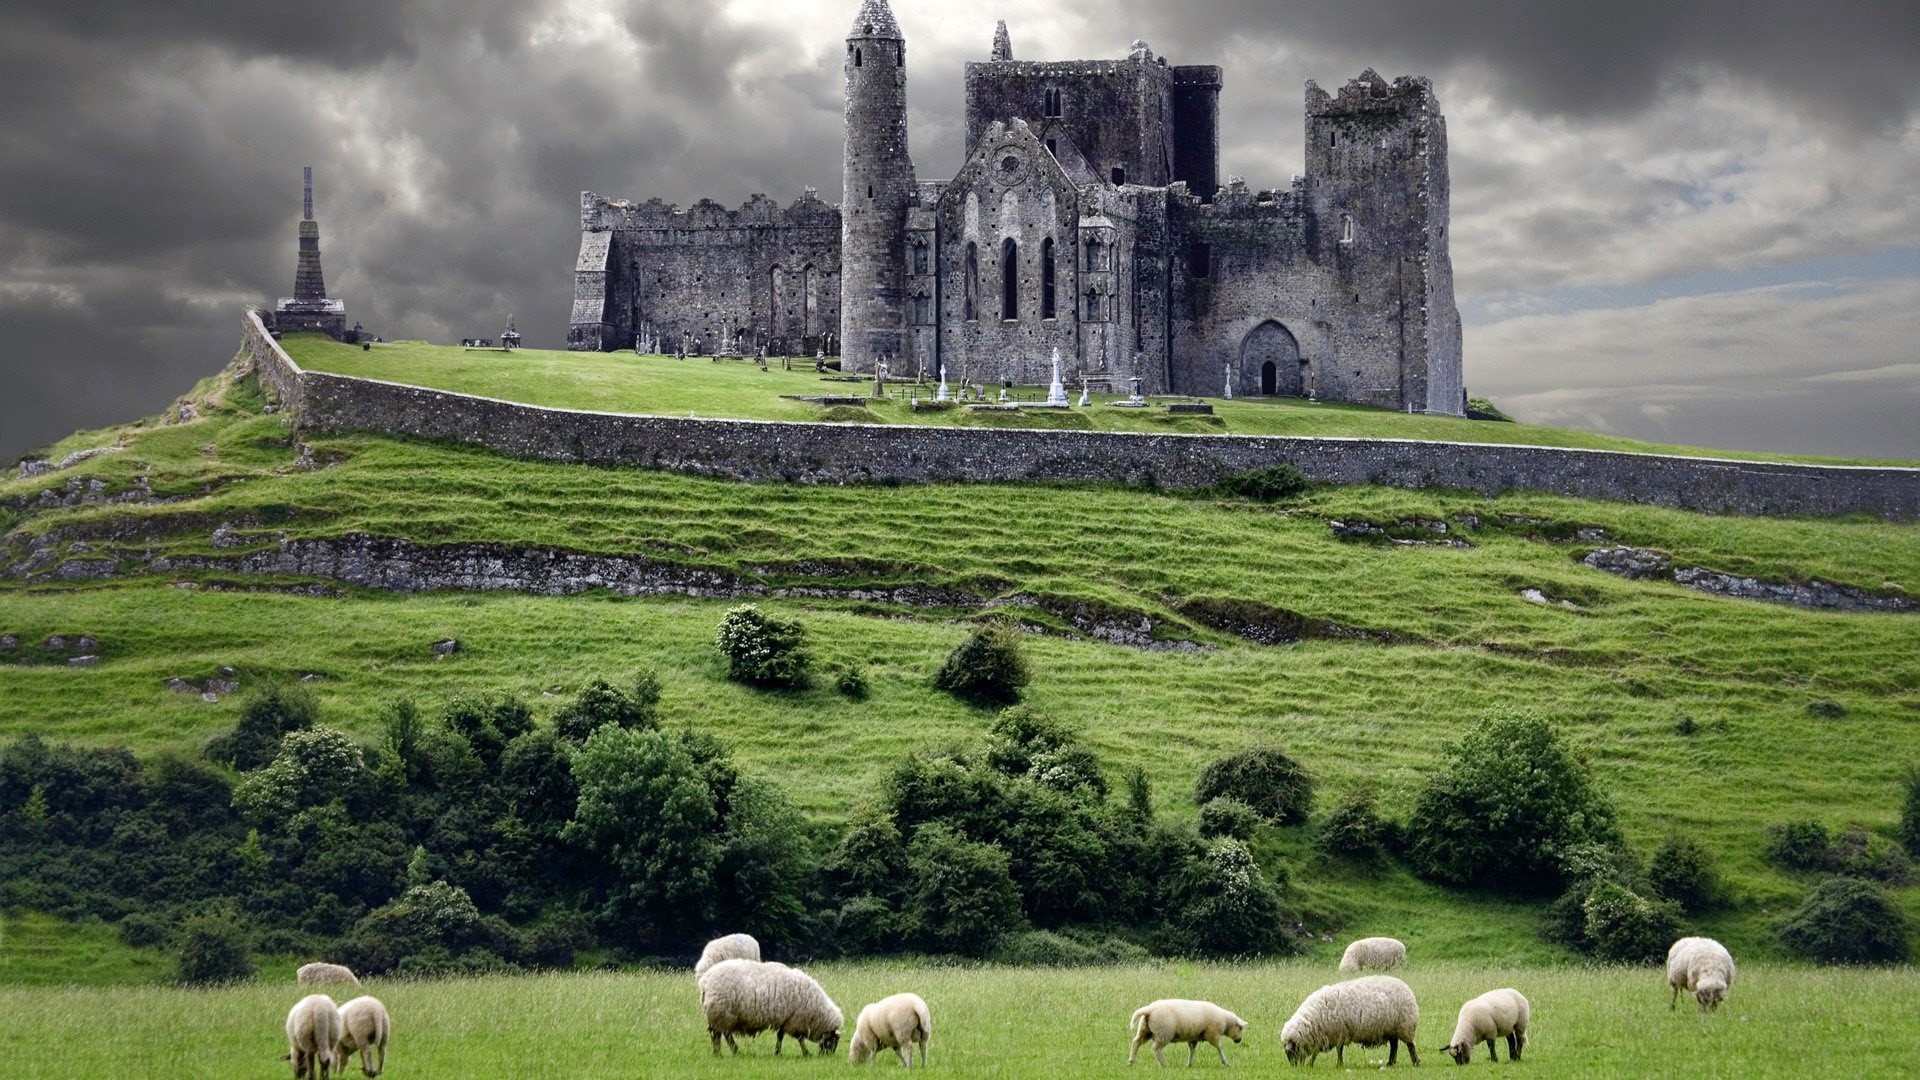 Sheep in the pasture at the castle in ireland desktop wallpapers x